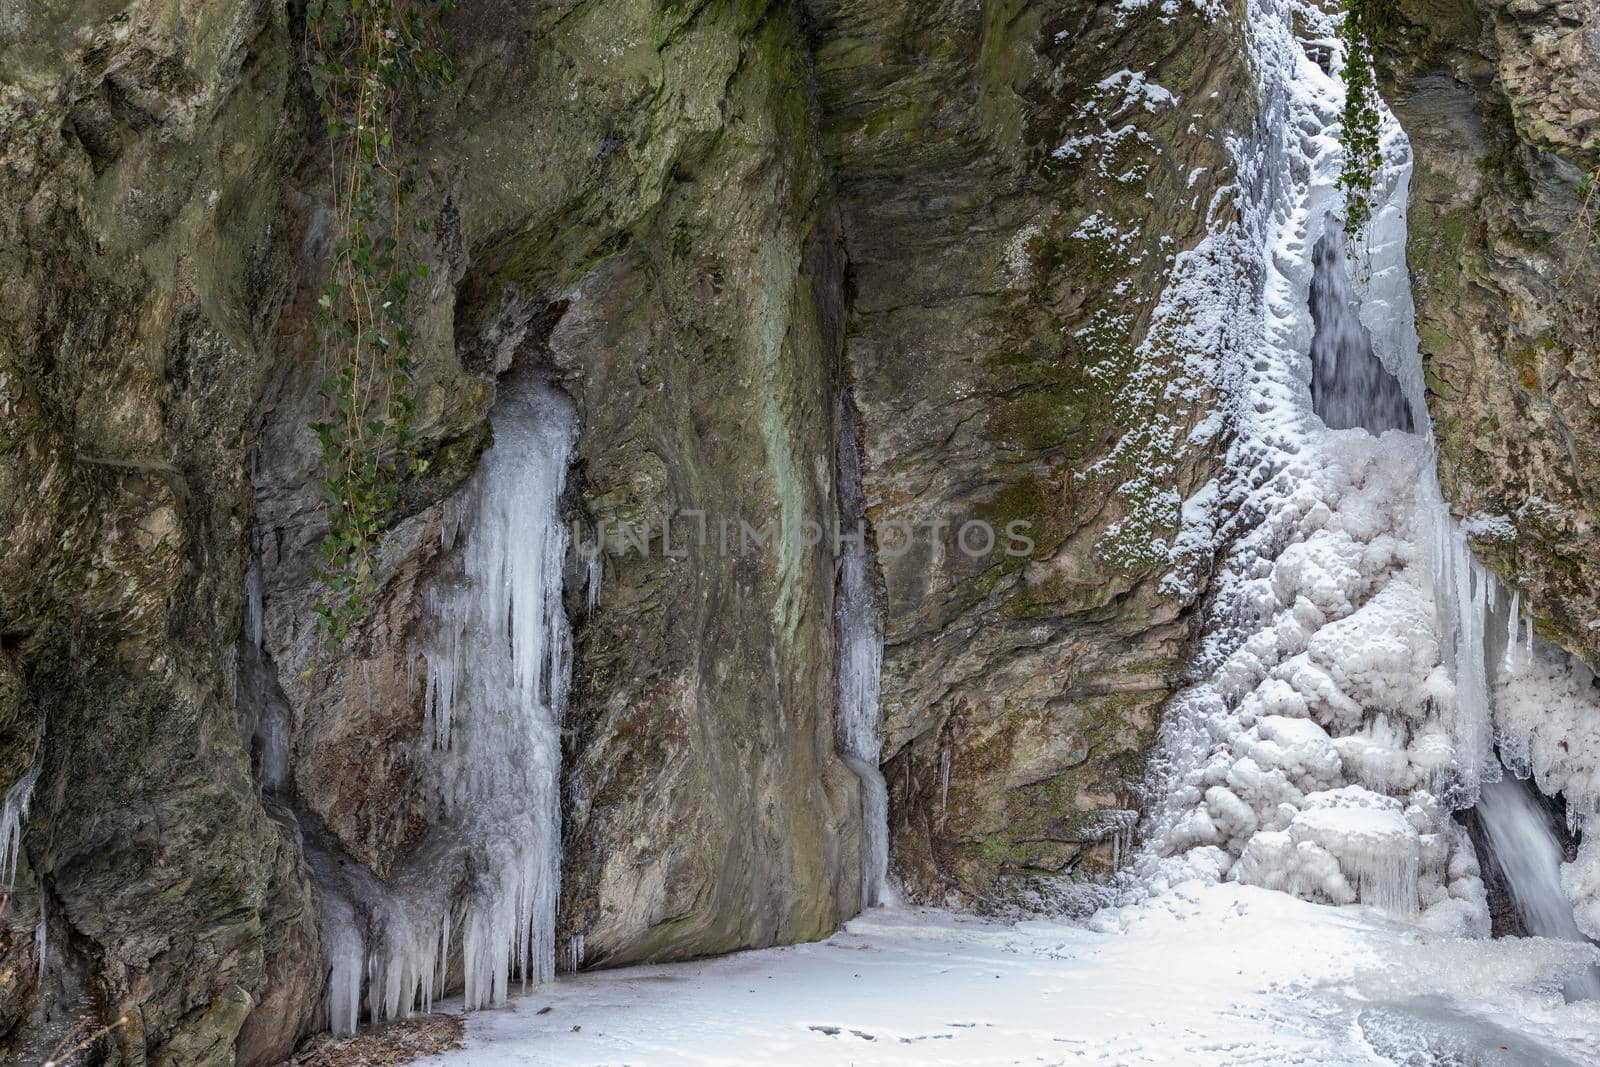 Ice formation at the waterfall of the Tiefenbach near Bernkastel-Kues on the Moselle by reinerc